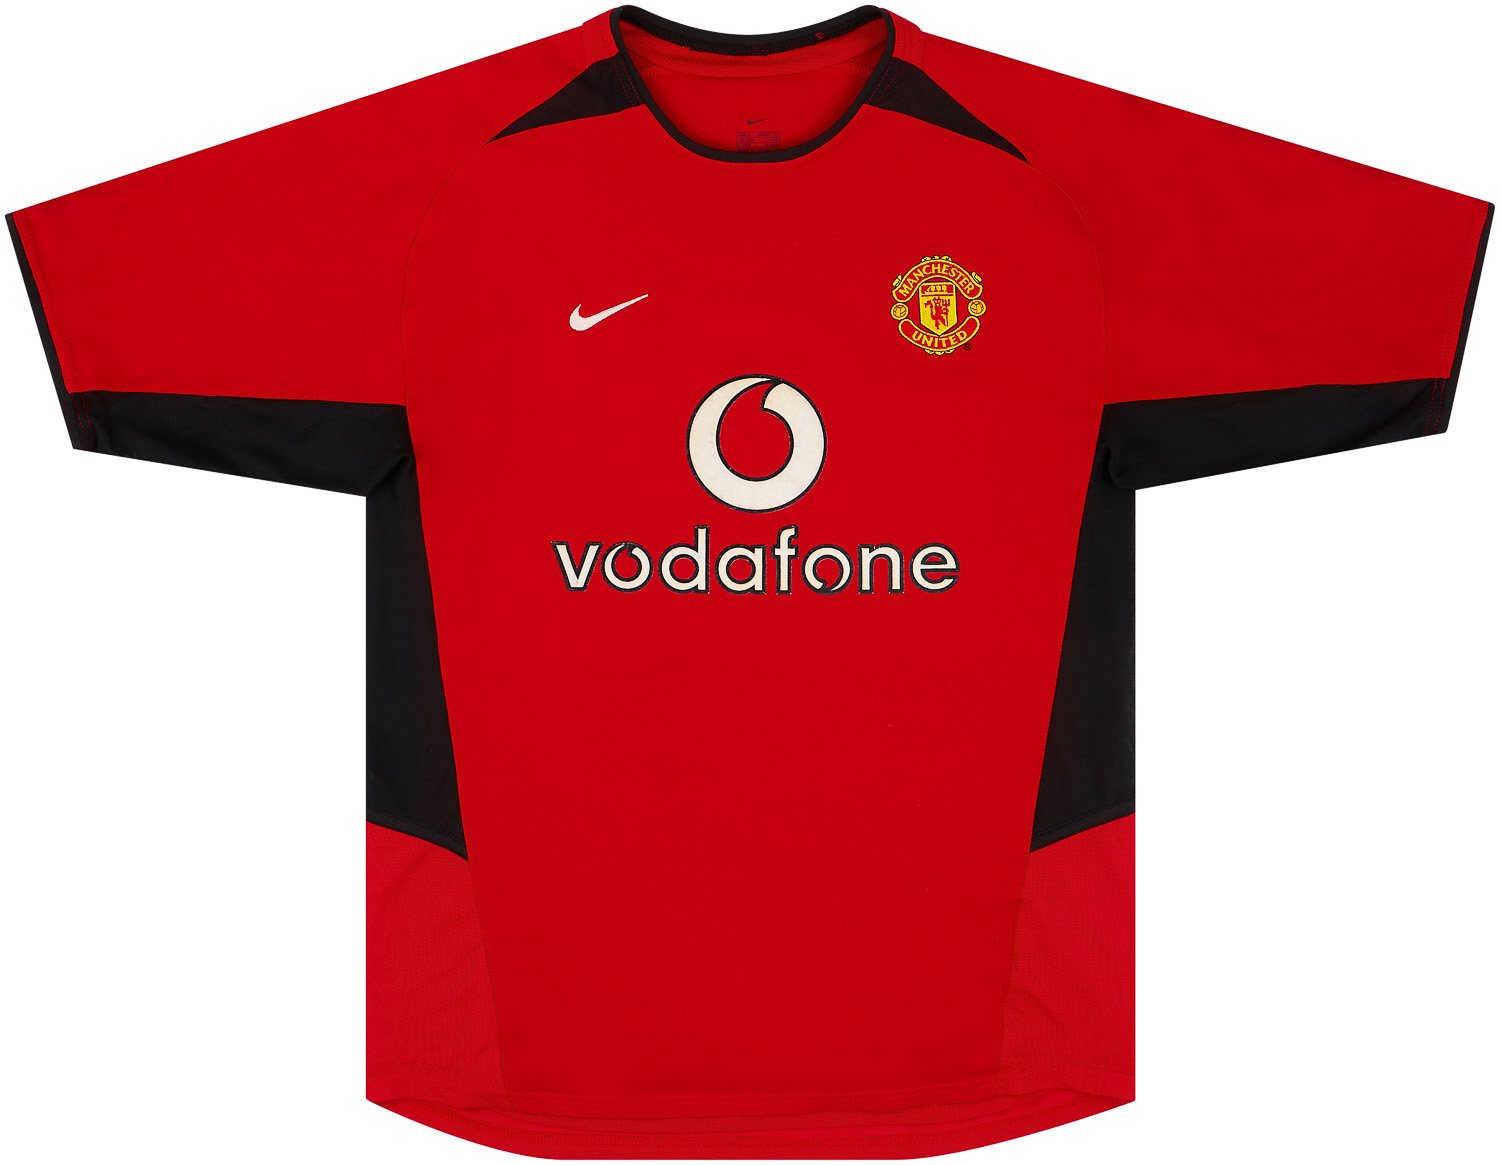 2002-04 Manchester United Home Shirt - 6/10 -